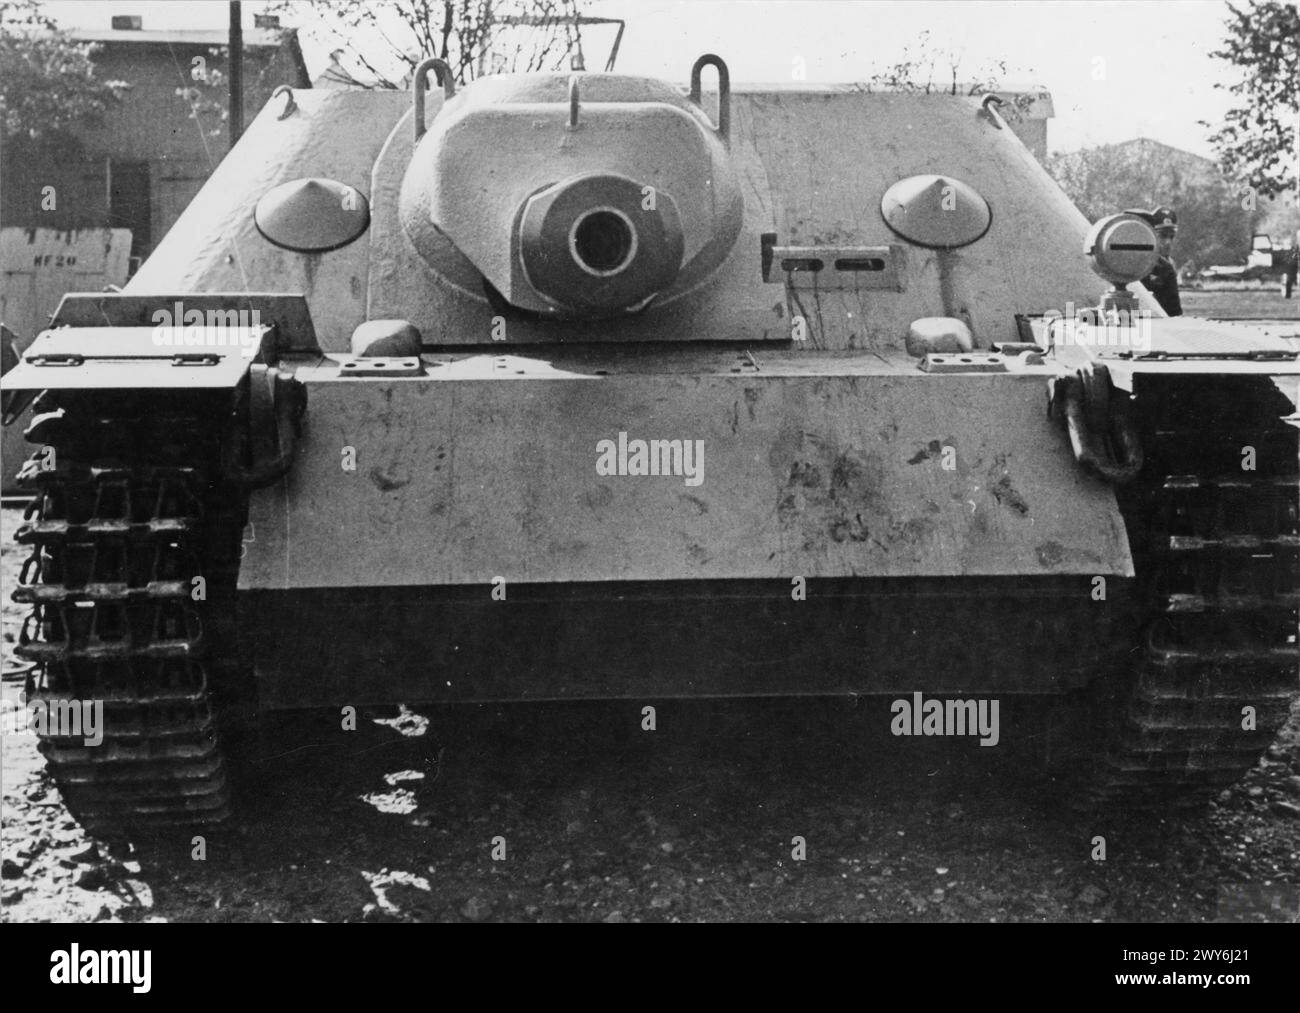 GERMAN TANKS AND MILITARY VEHICLES OF THE SECOND WORLD WAR - Jagdpanzer IV prototype , Stock Photo